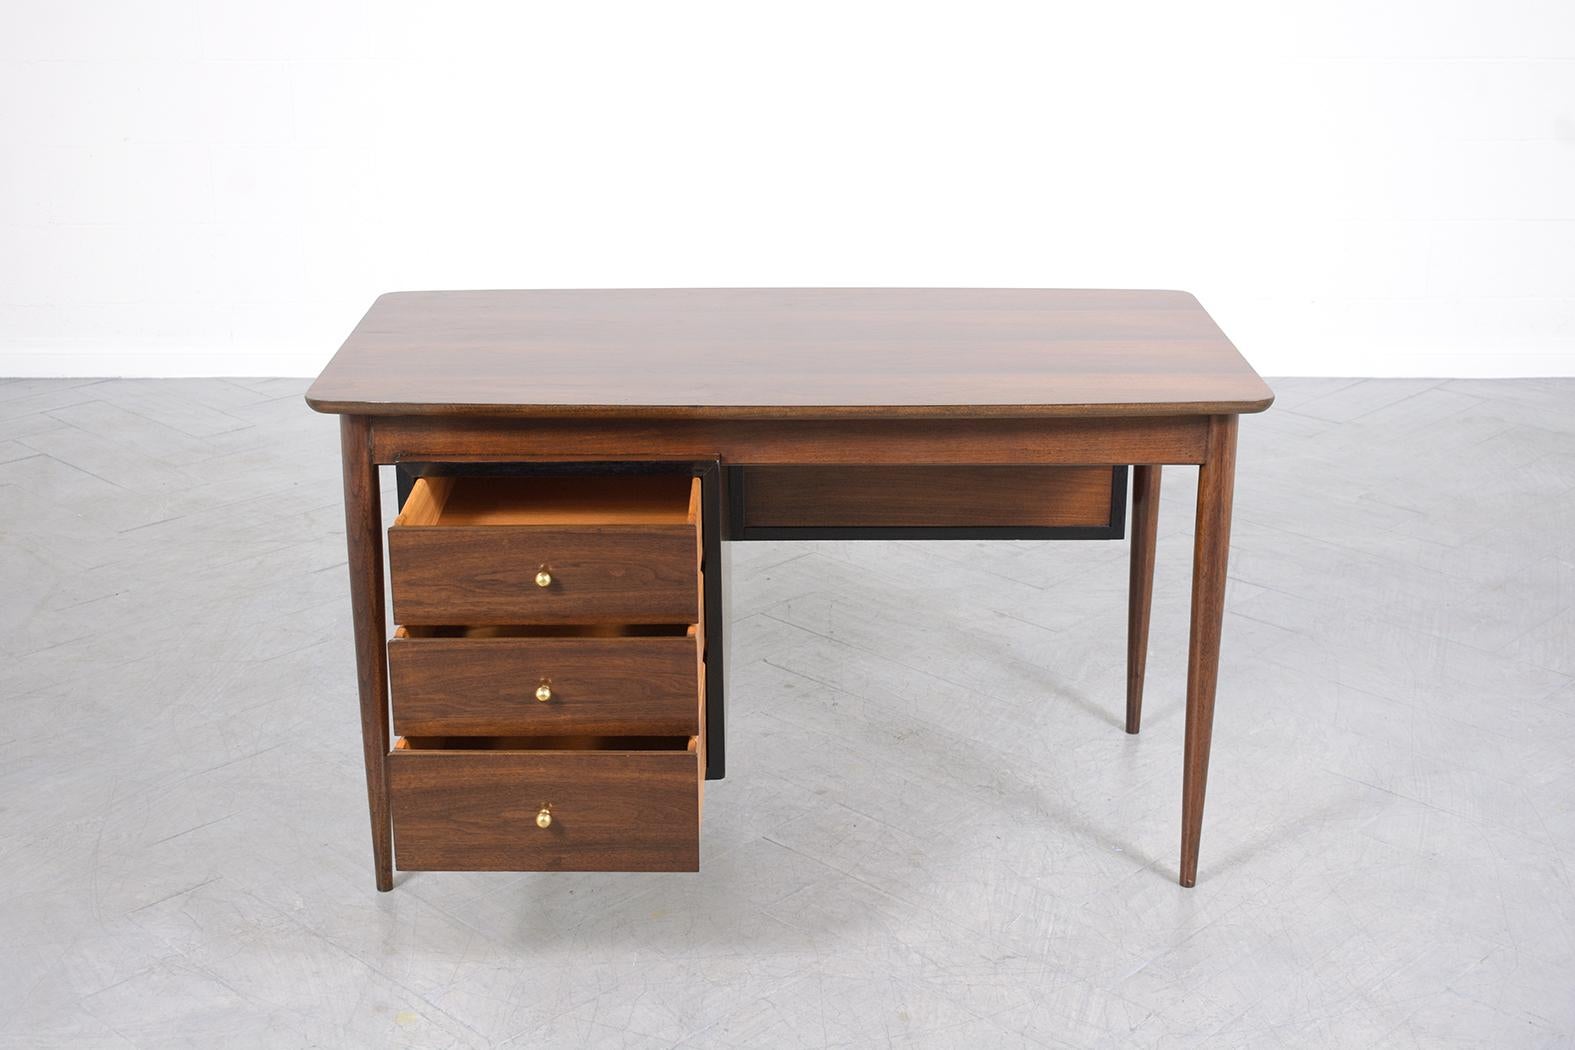 Hand-Carved Danish Modern Executive Desk in Walnut with Ebonized Accents